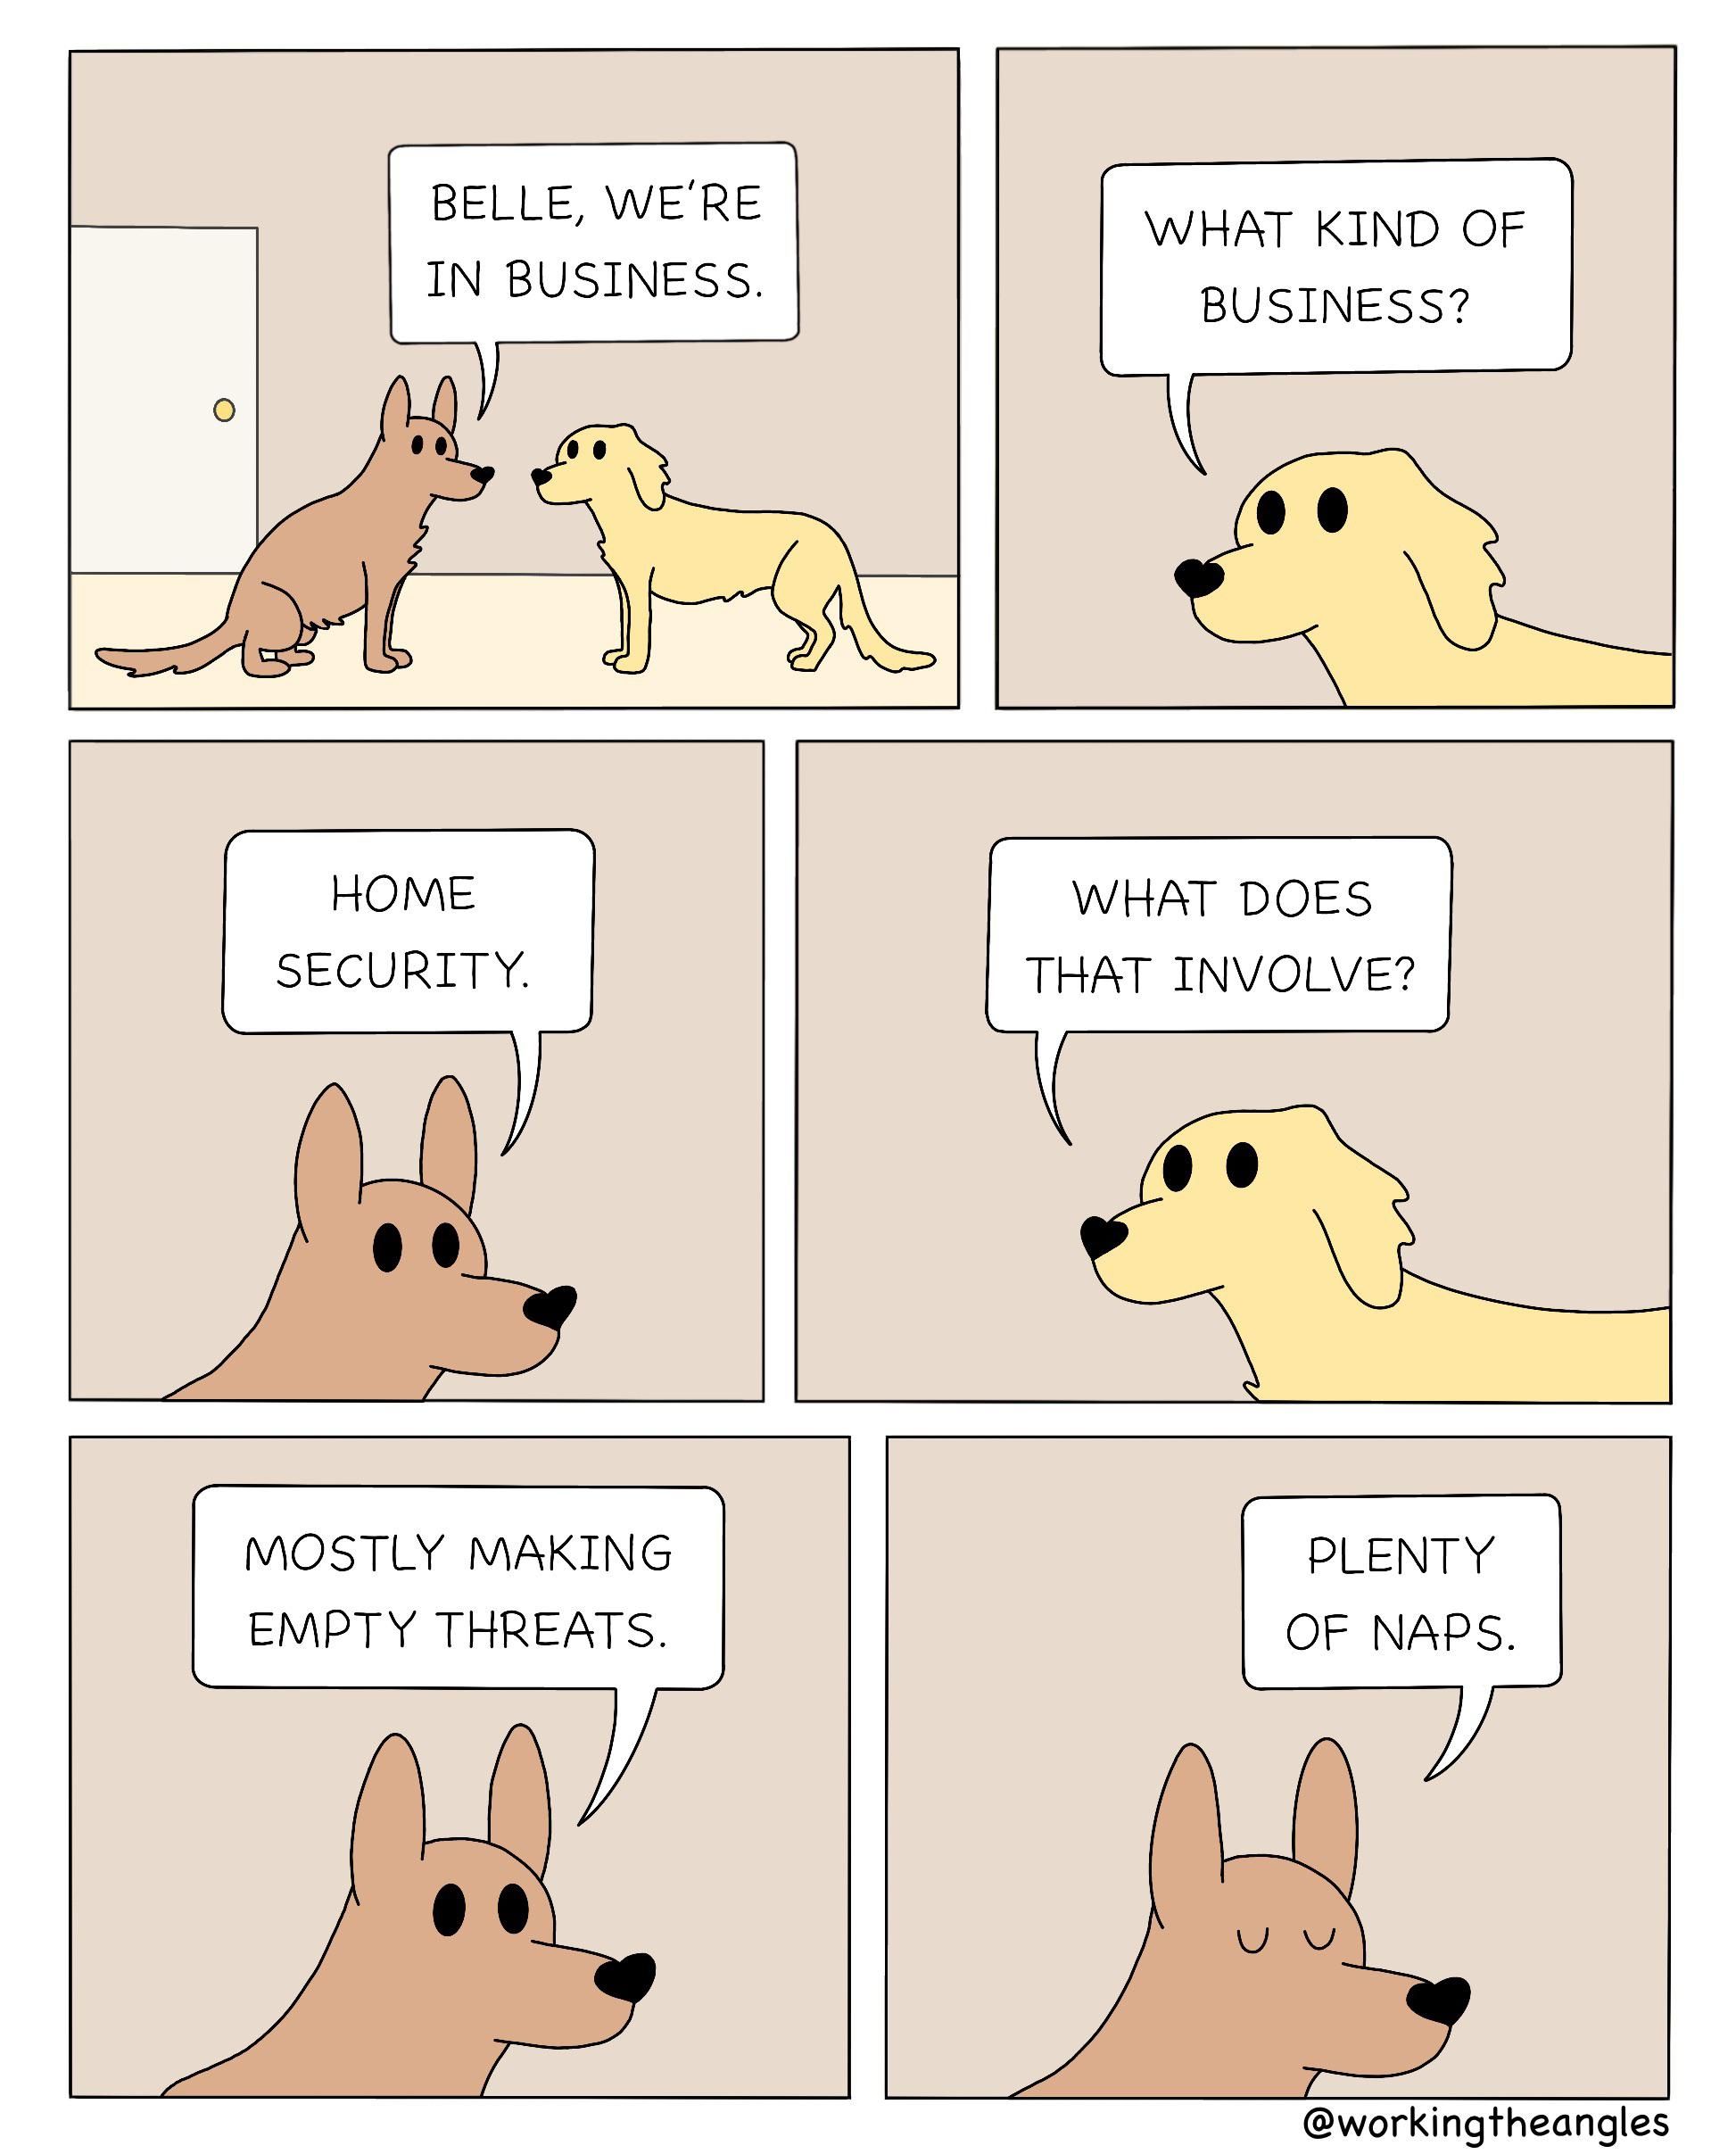 Working dogs